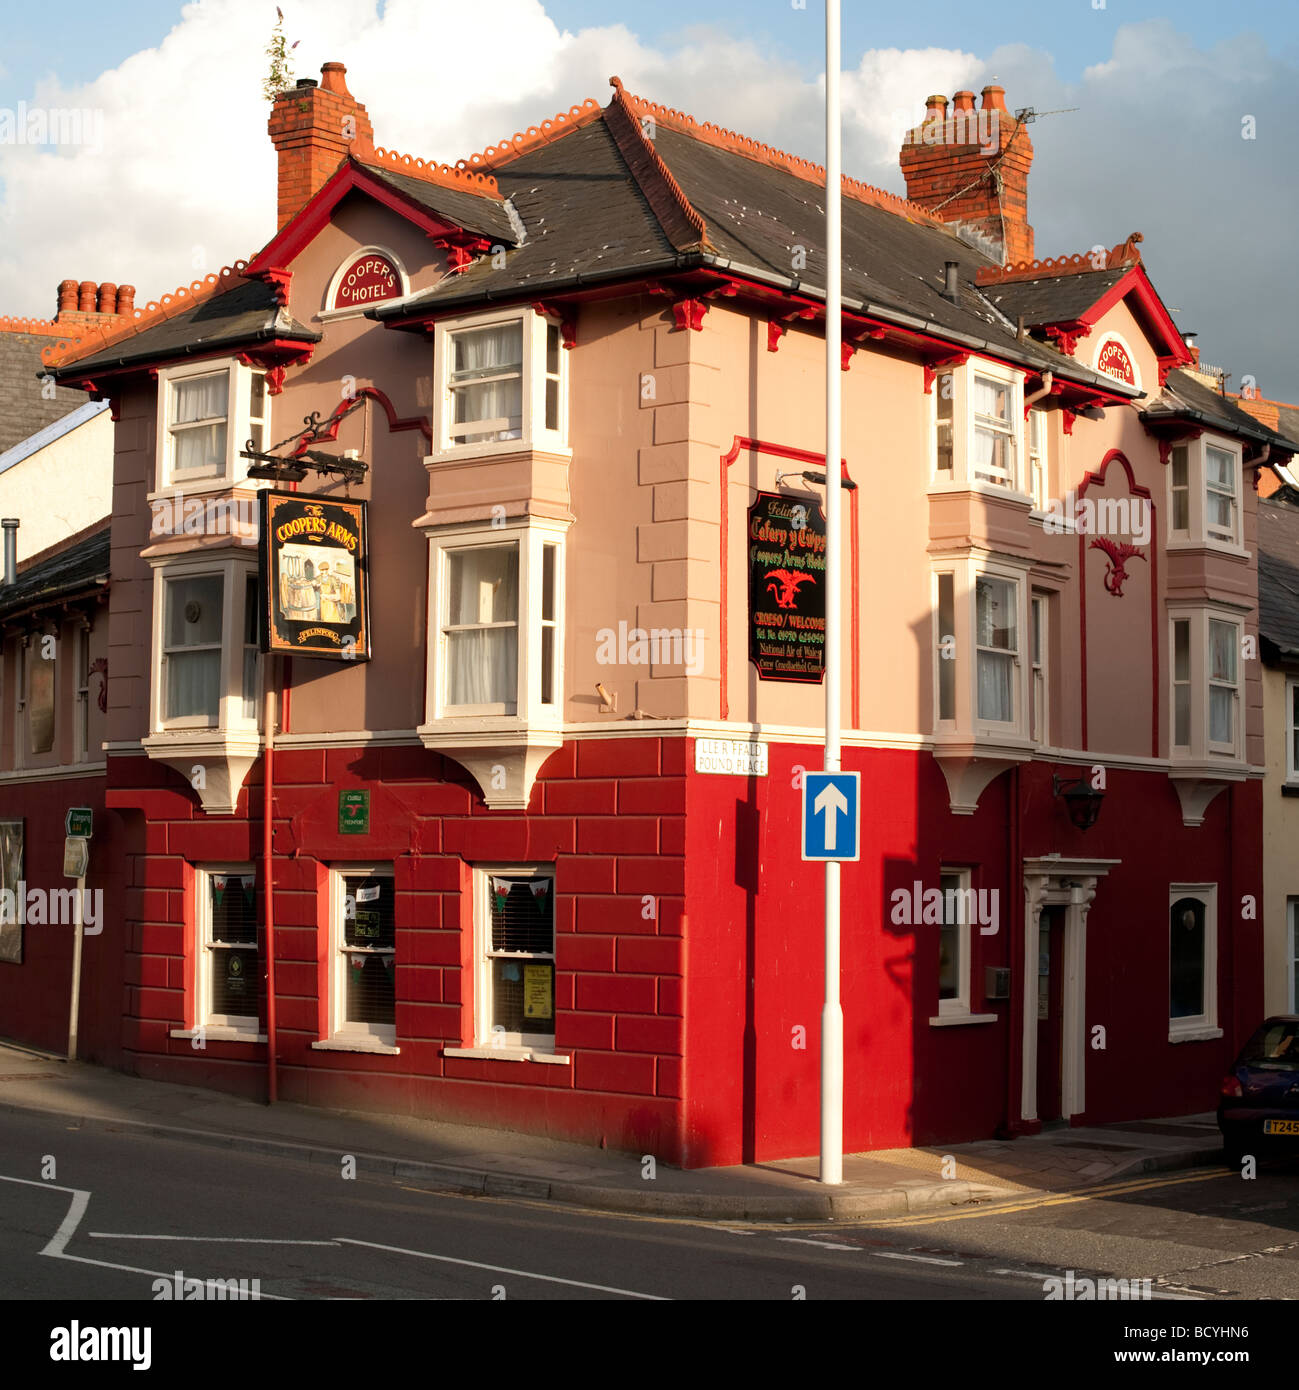 Exterior The Coopers Arms "Y Cwps" pub Aberystwyth Wales UK Stock Photo